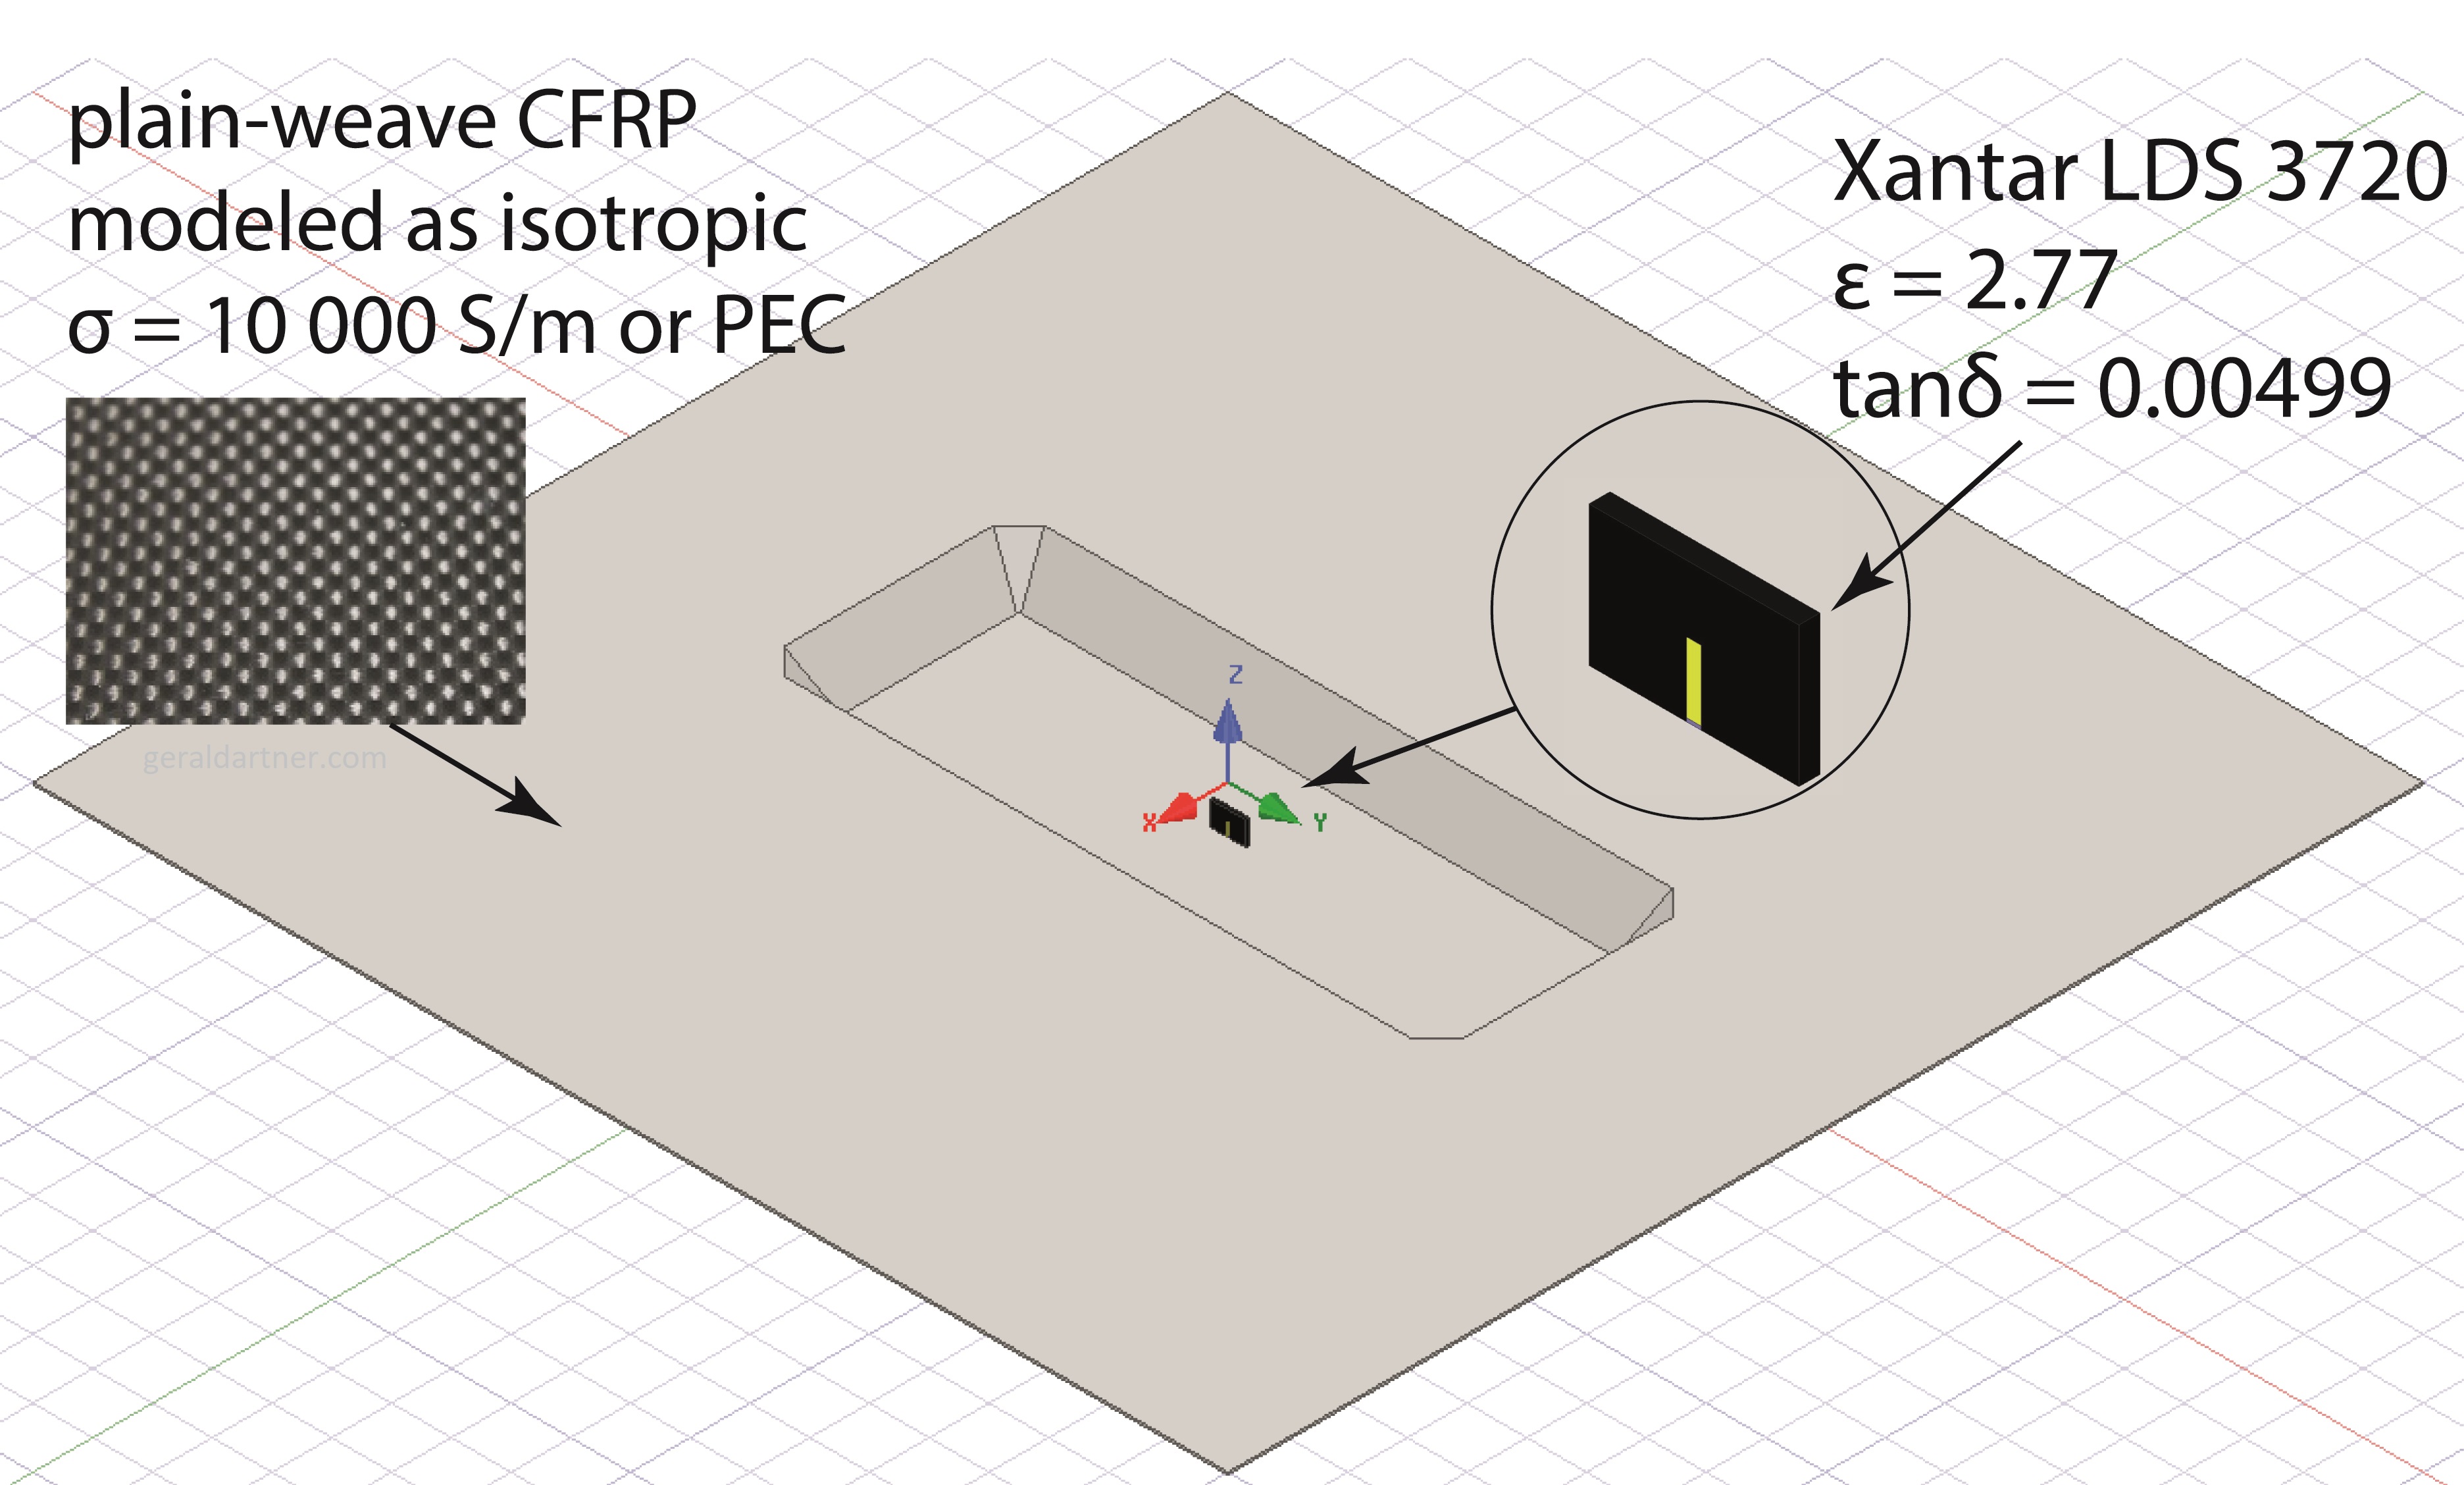 Simulation Model for Chassis Antenna Cavities Made from CFRP